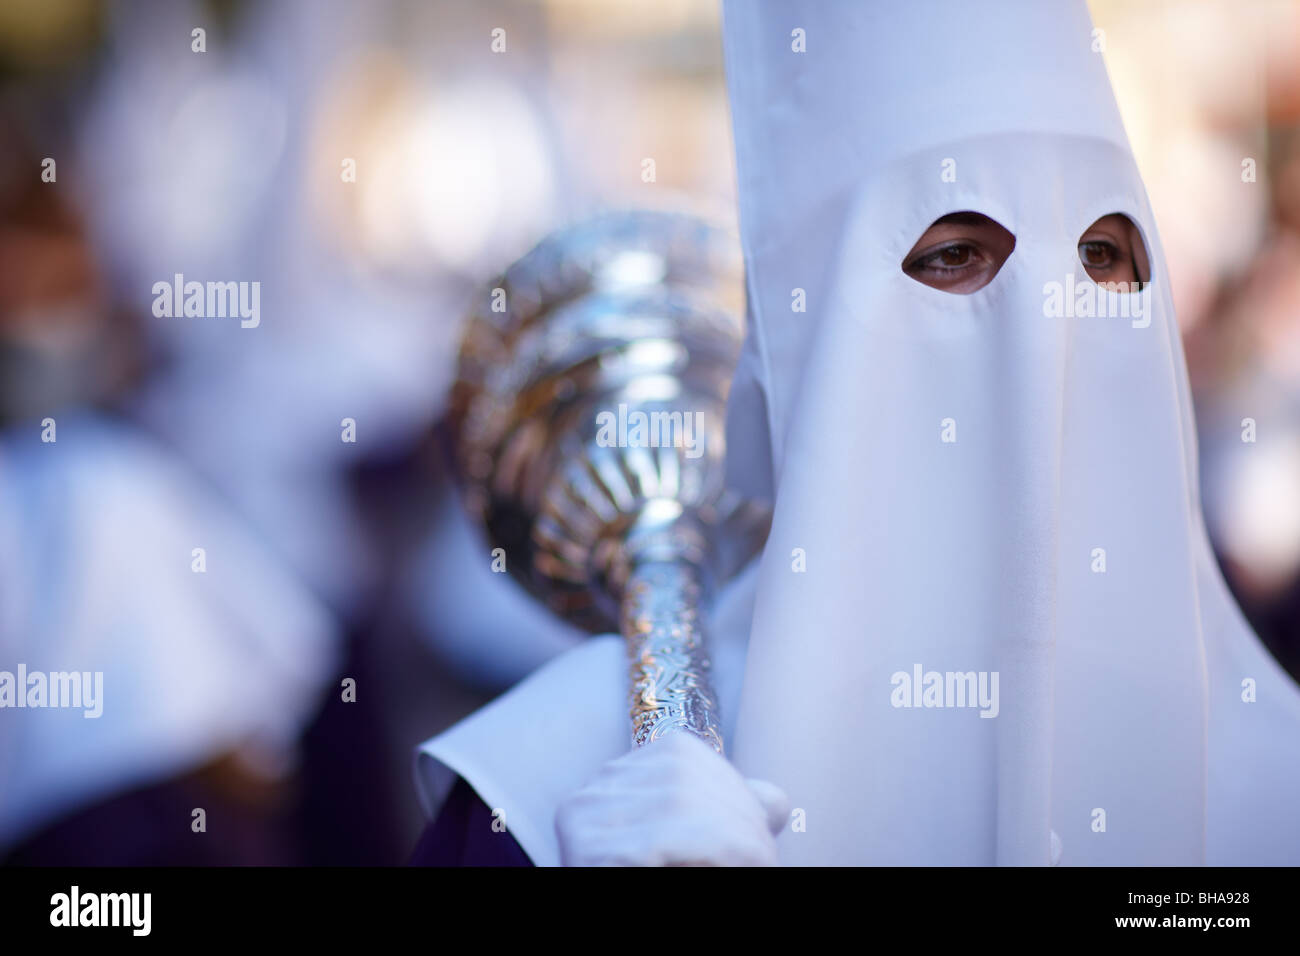 a penitent carrying a mace in the Semana Santa procession in Malaga, Andalucia, Spain Stock Photo